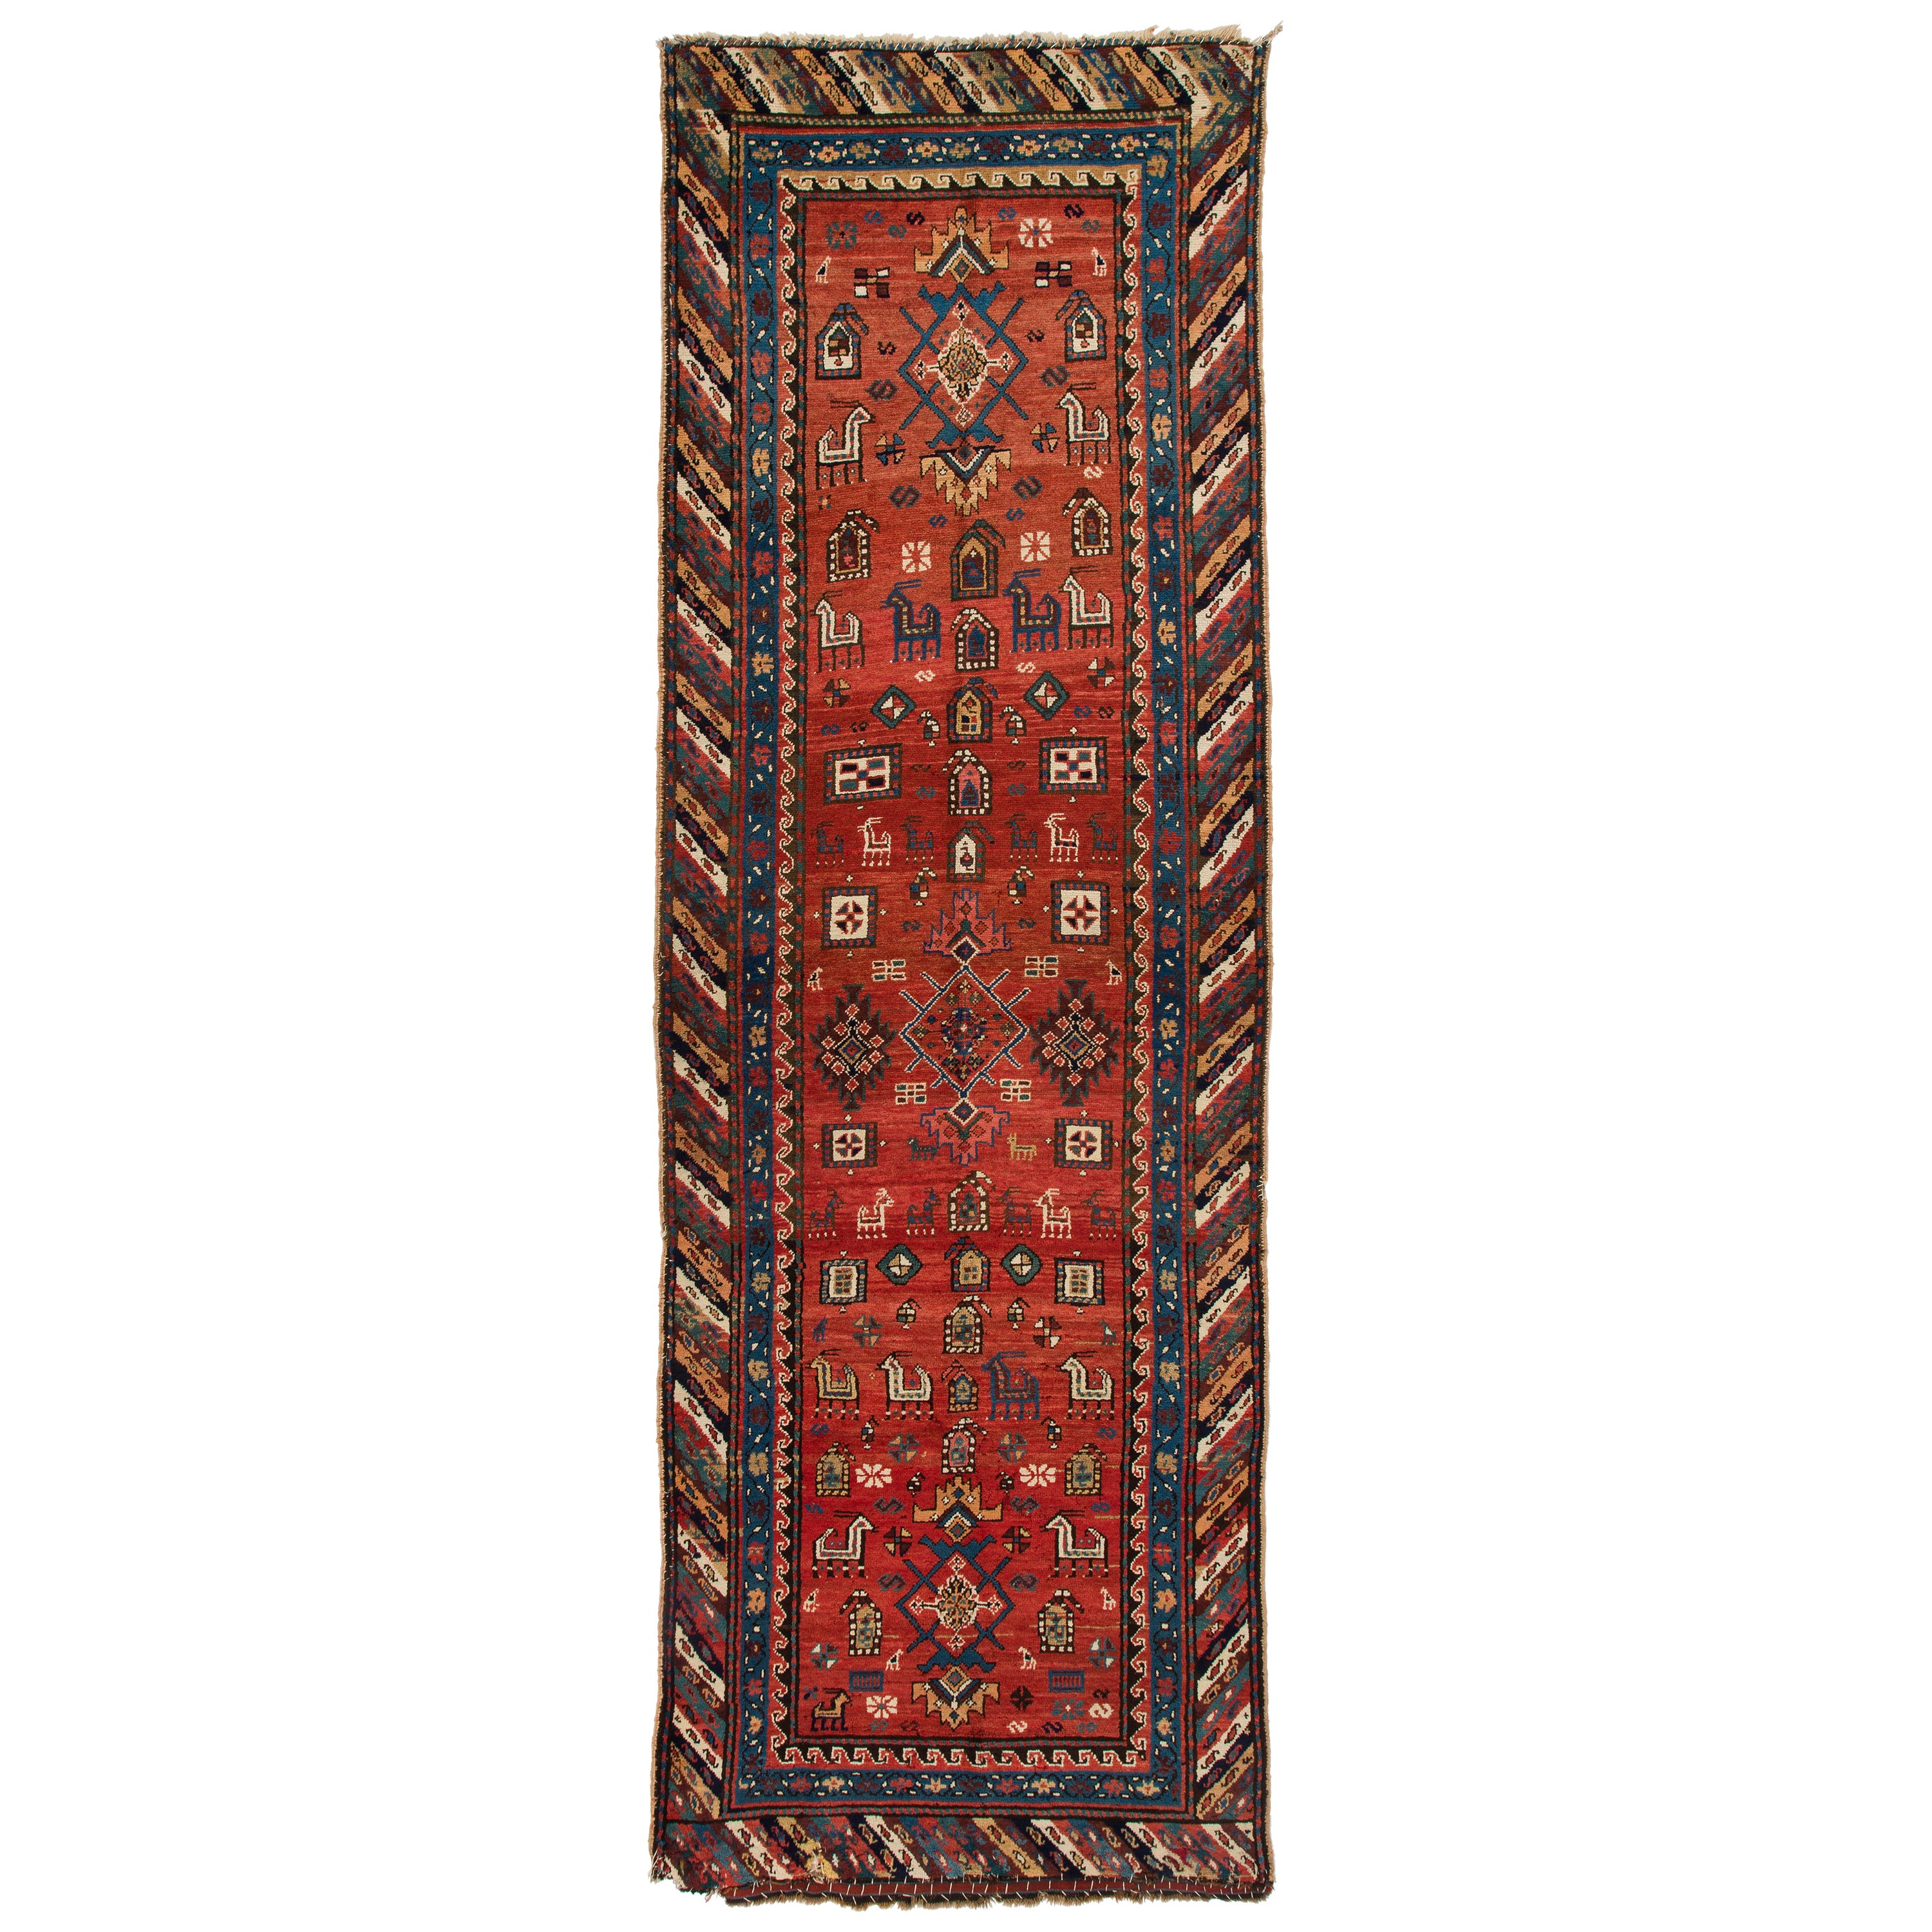 3.7x11 ft Antique Caucasian Shahsavan Runner Rug with Zoomorphic Animals Pattern For Sale